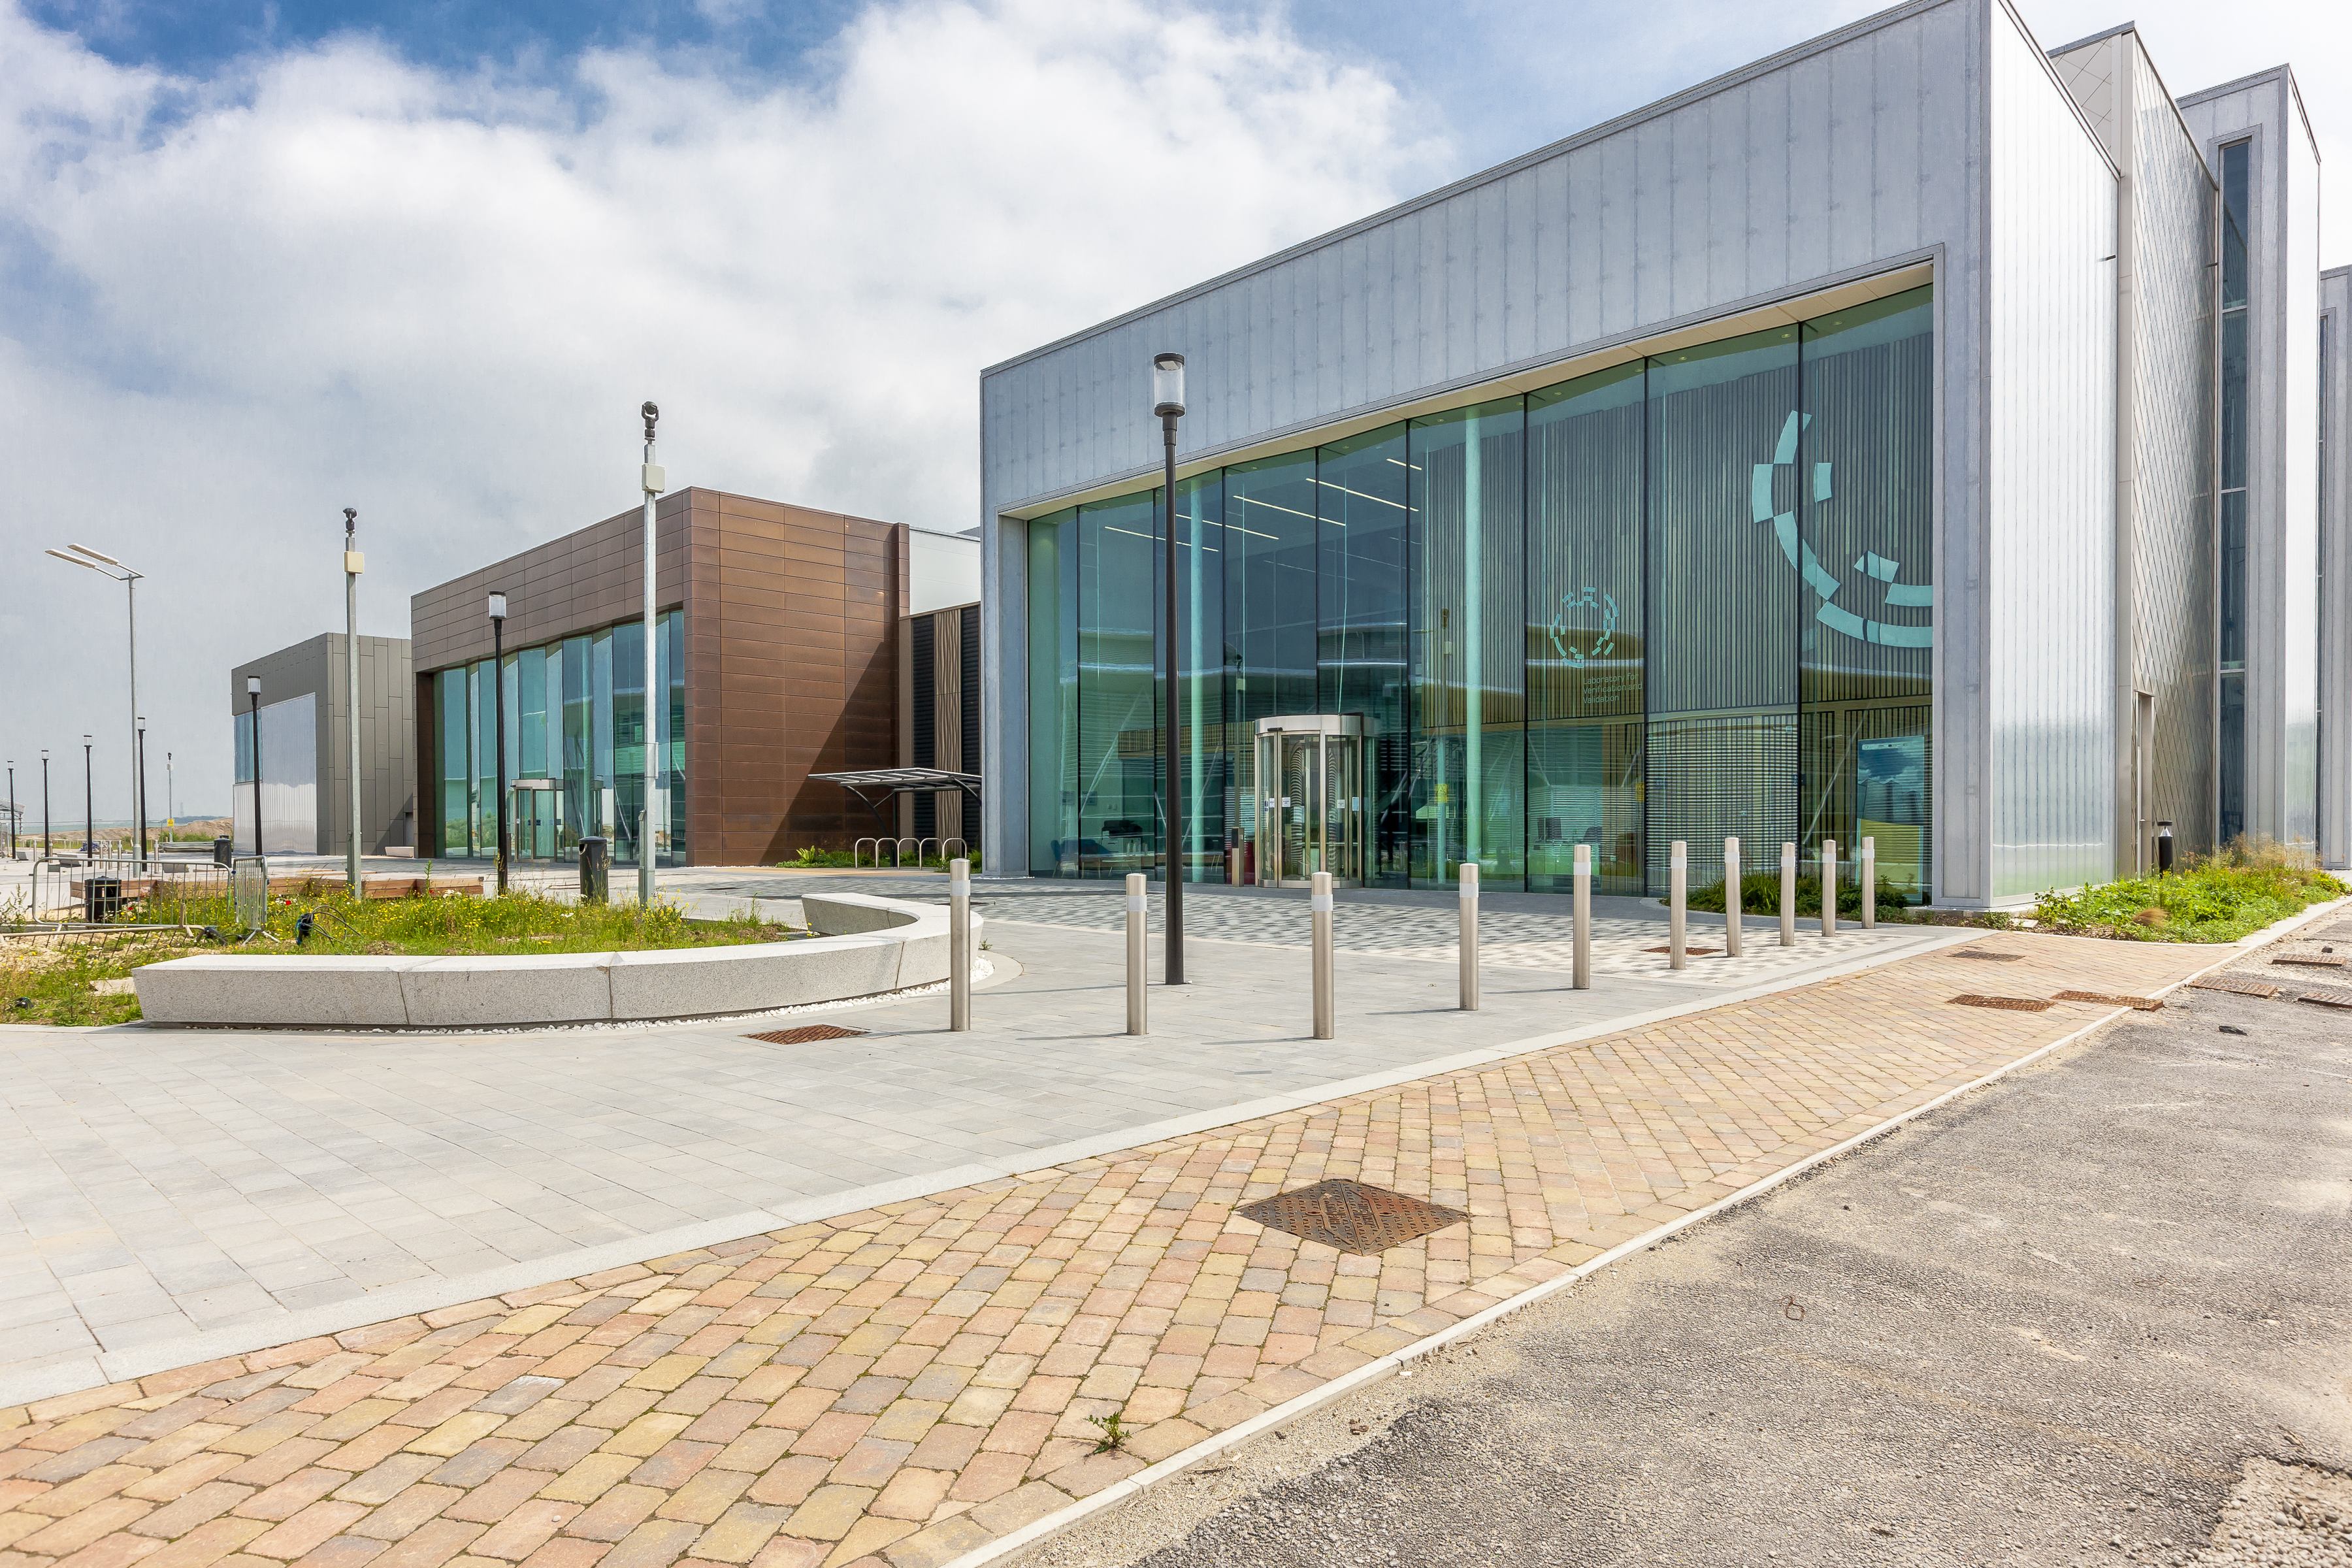 AMRC2_Rotherham_Completed_29-05-18 (8).jpg